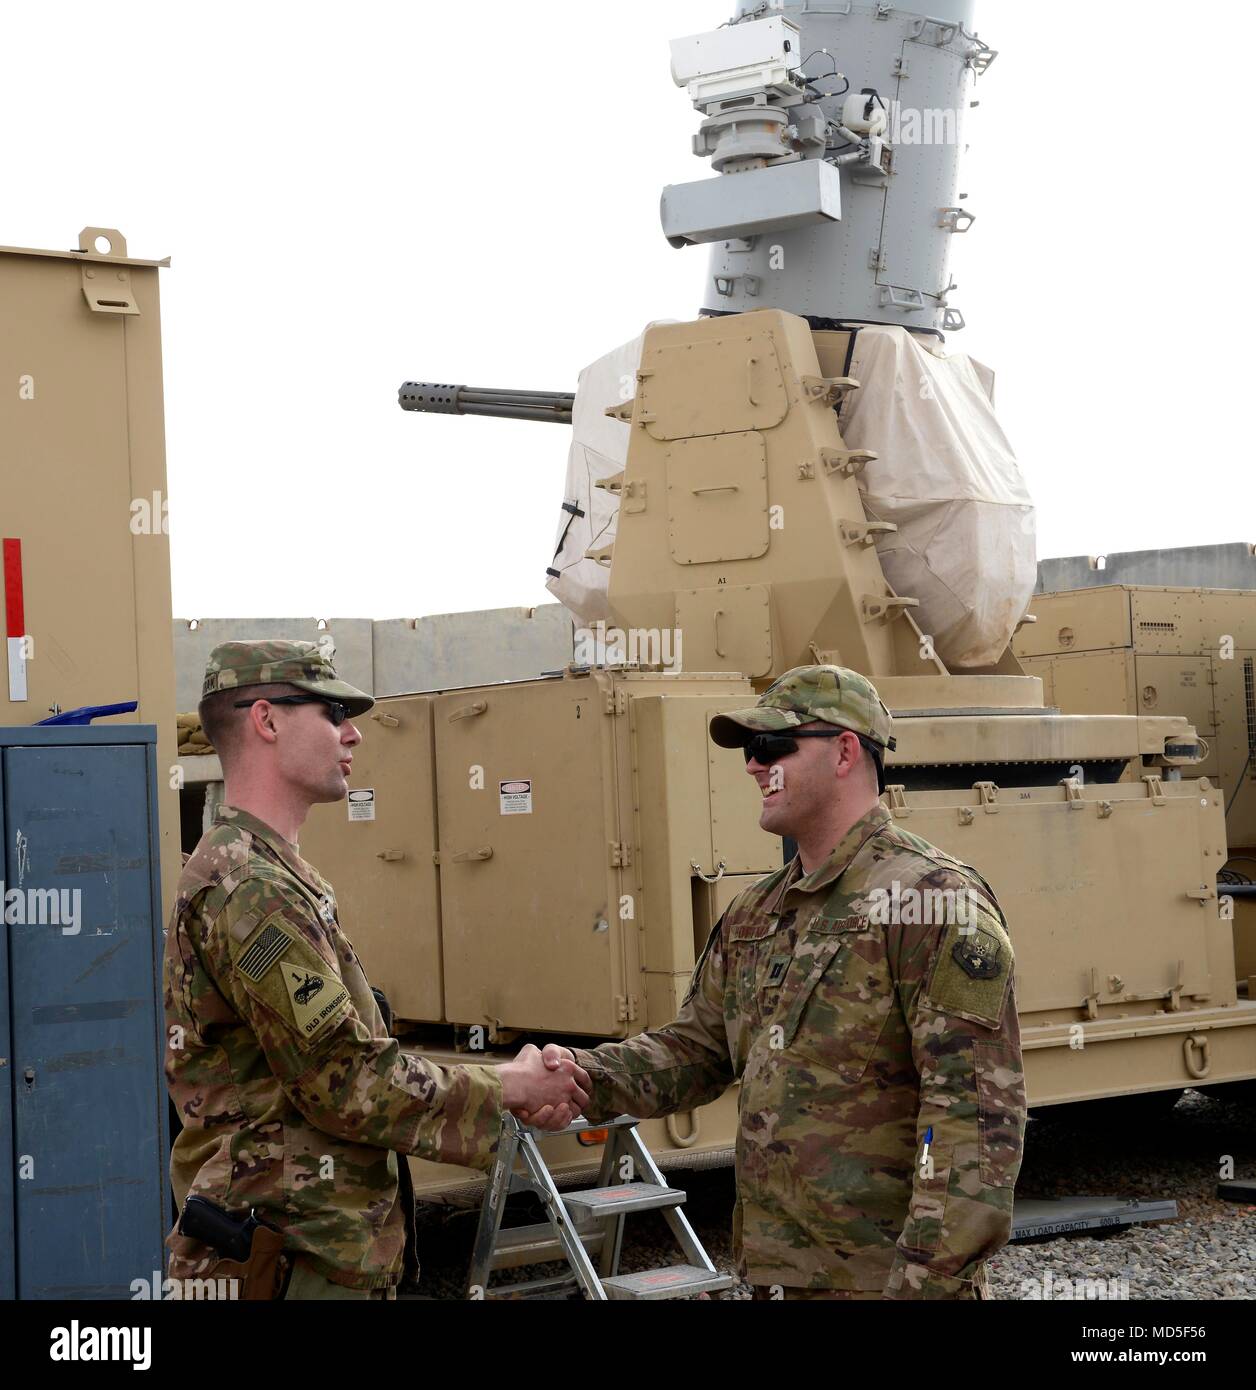 U.S. Army Capt. Eric Sylwestrak, battery commander, 2nd Battalion, 174th Air Defense Artillery Regiment, Ohio Army National Guard, shakes hands with U.S. Air Force Capt. Isaac Hoffman, project engineering officer-in-charge, 220th Engineering Installation Squadron, Ohio Air National Guard, in front of one of the Army's Counter-Rocket, Artillery, and Mortar (C-RAM) Intercept weapon systems at Kandahar Airfield, Afghanistan, March 10, 2018.  Airmen and Soldiers with both Ohio National Guard units worked together throughout a significant portion of their deployment during the past few months to co Stock Photo